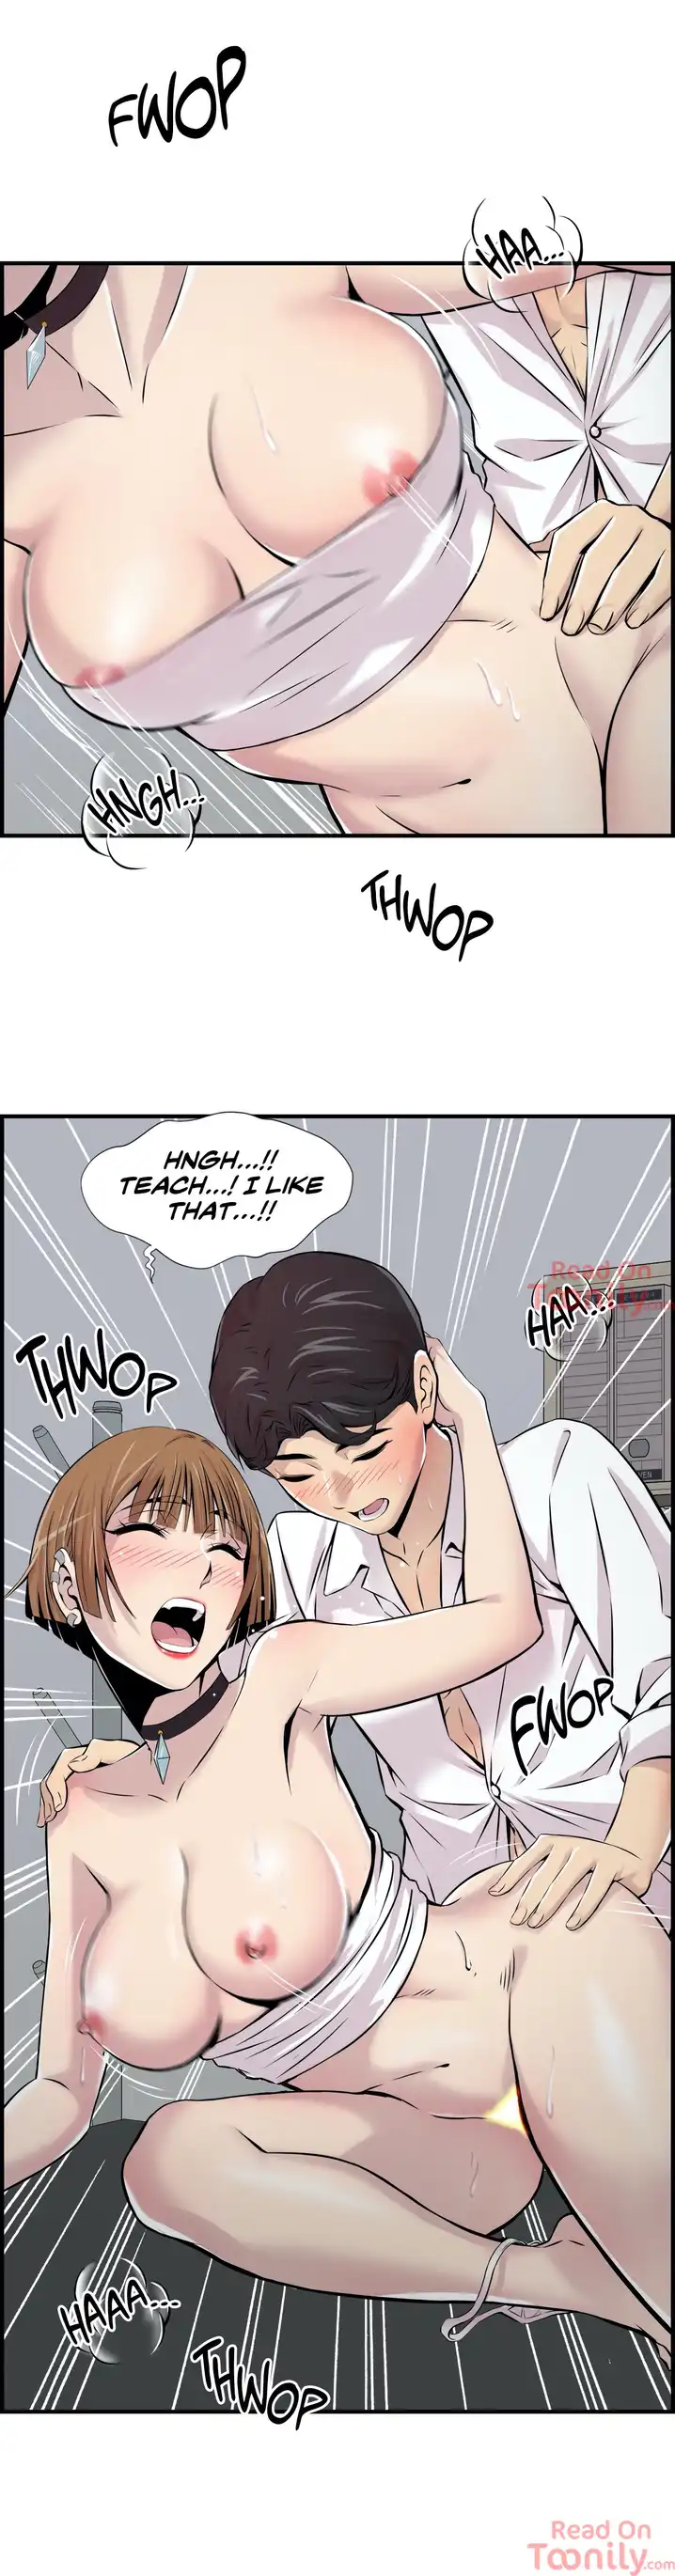 Cram School Scandal - Chapter 3 Page 2